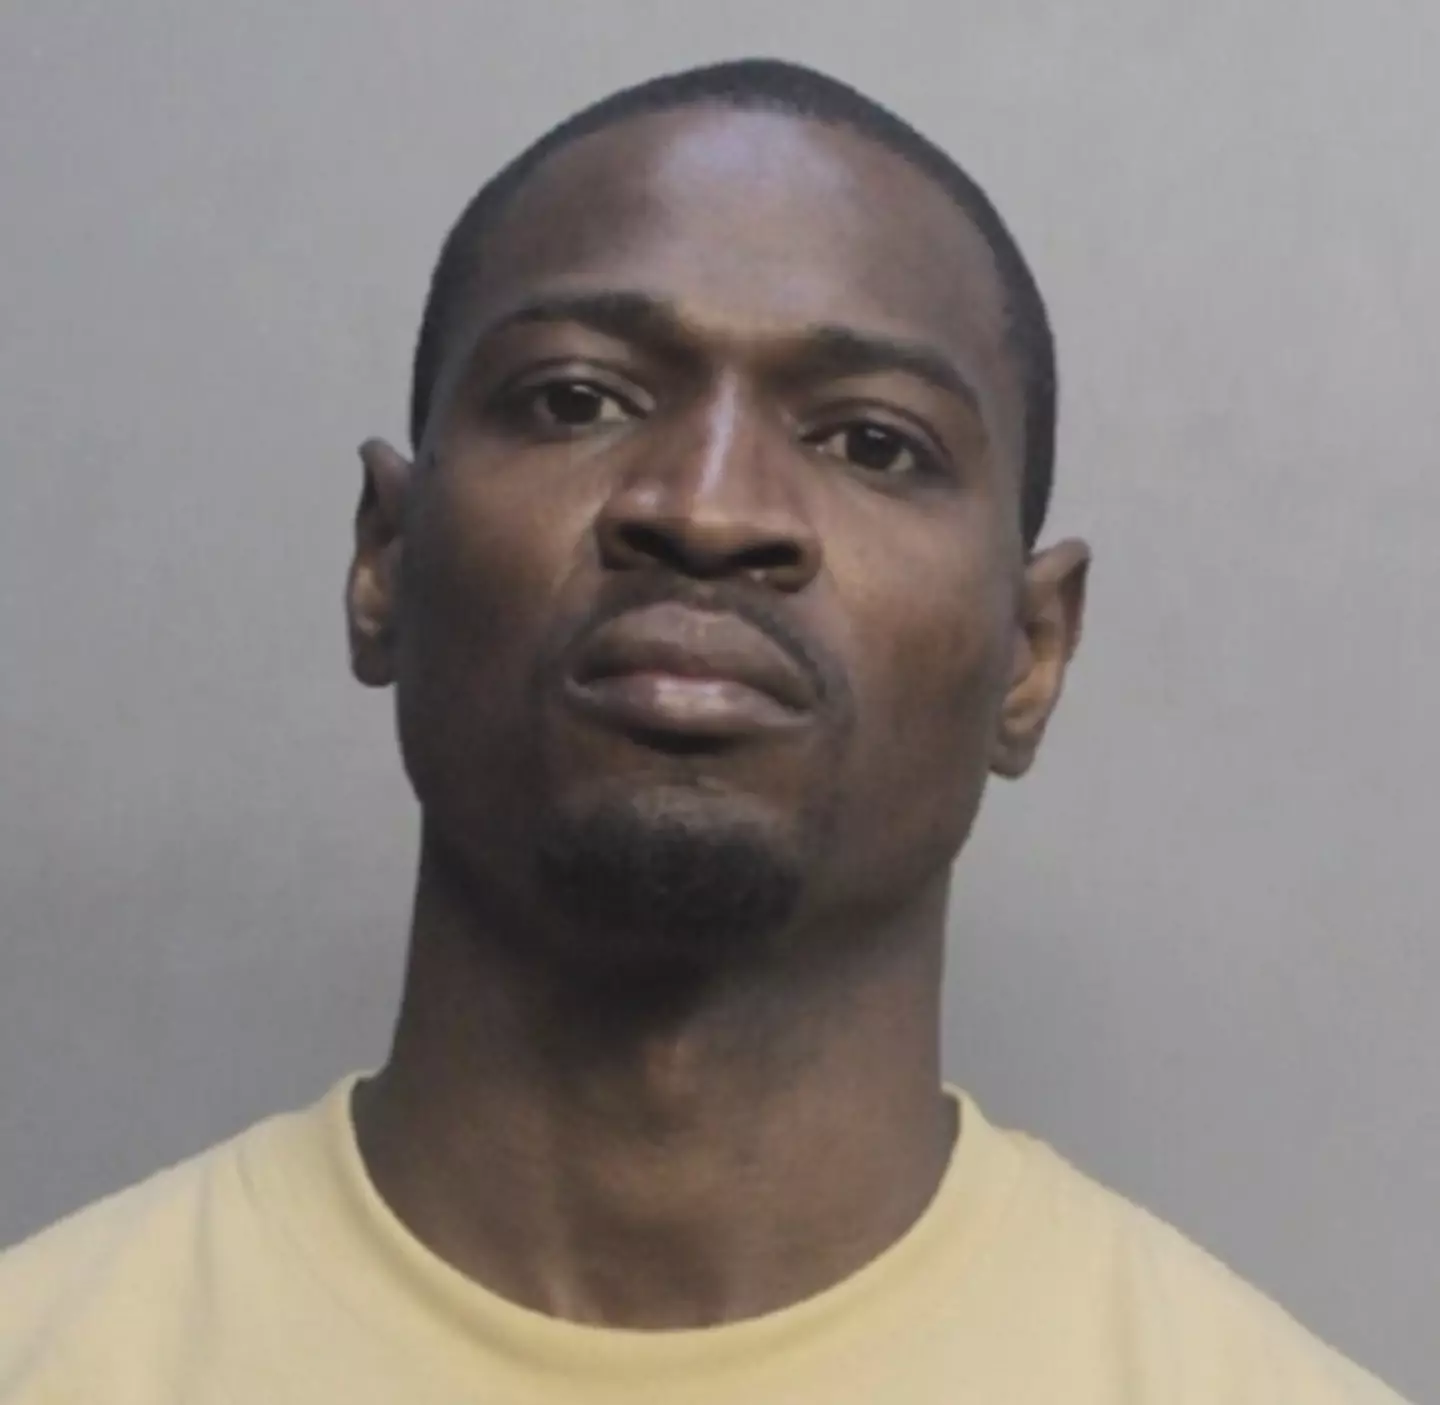 Jermaine Bell was seen drinking a cup of bleach after being convicted of armed robbery.